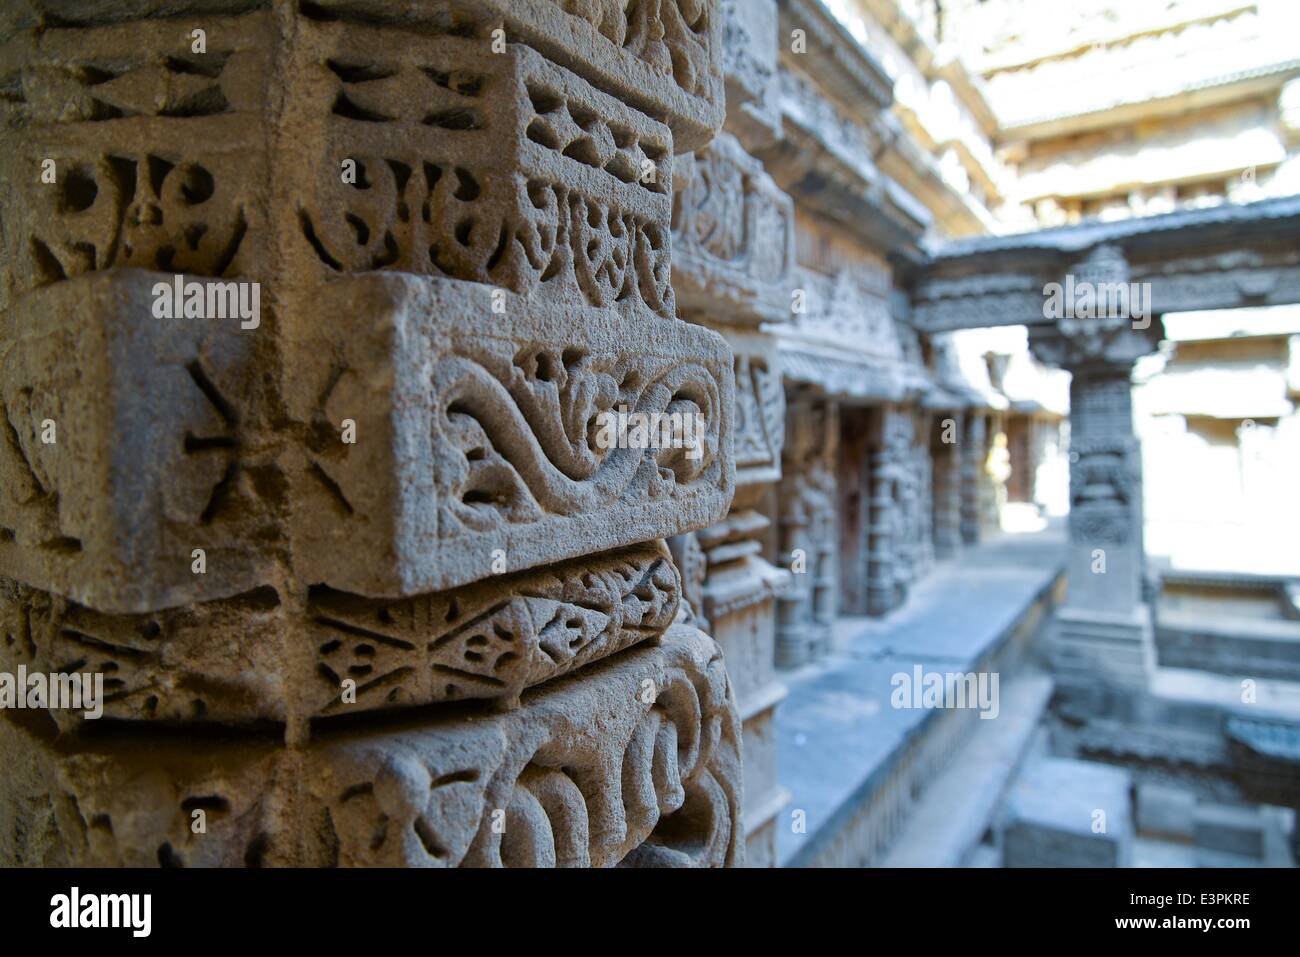 The intricate carvings of the structure of 'Rani-ki-Vav'. Rani Ki Vav is one of the finest stepwells in India. It is a stepwell in Gujarat built in the 11th century in memory of King Bhimdev I of the Solanki dynasty. The stepwell was approved by UNESCO as World Heritage Site for its exceptional example of technological development in utilizing ground water resources. (Photo by Nisarg Lakhamani/Pacific Press) Stock Photo